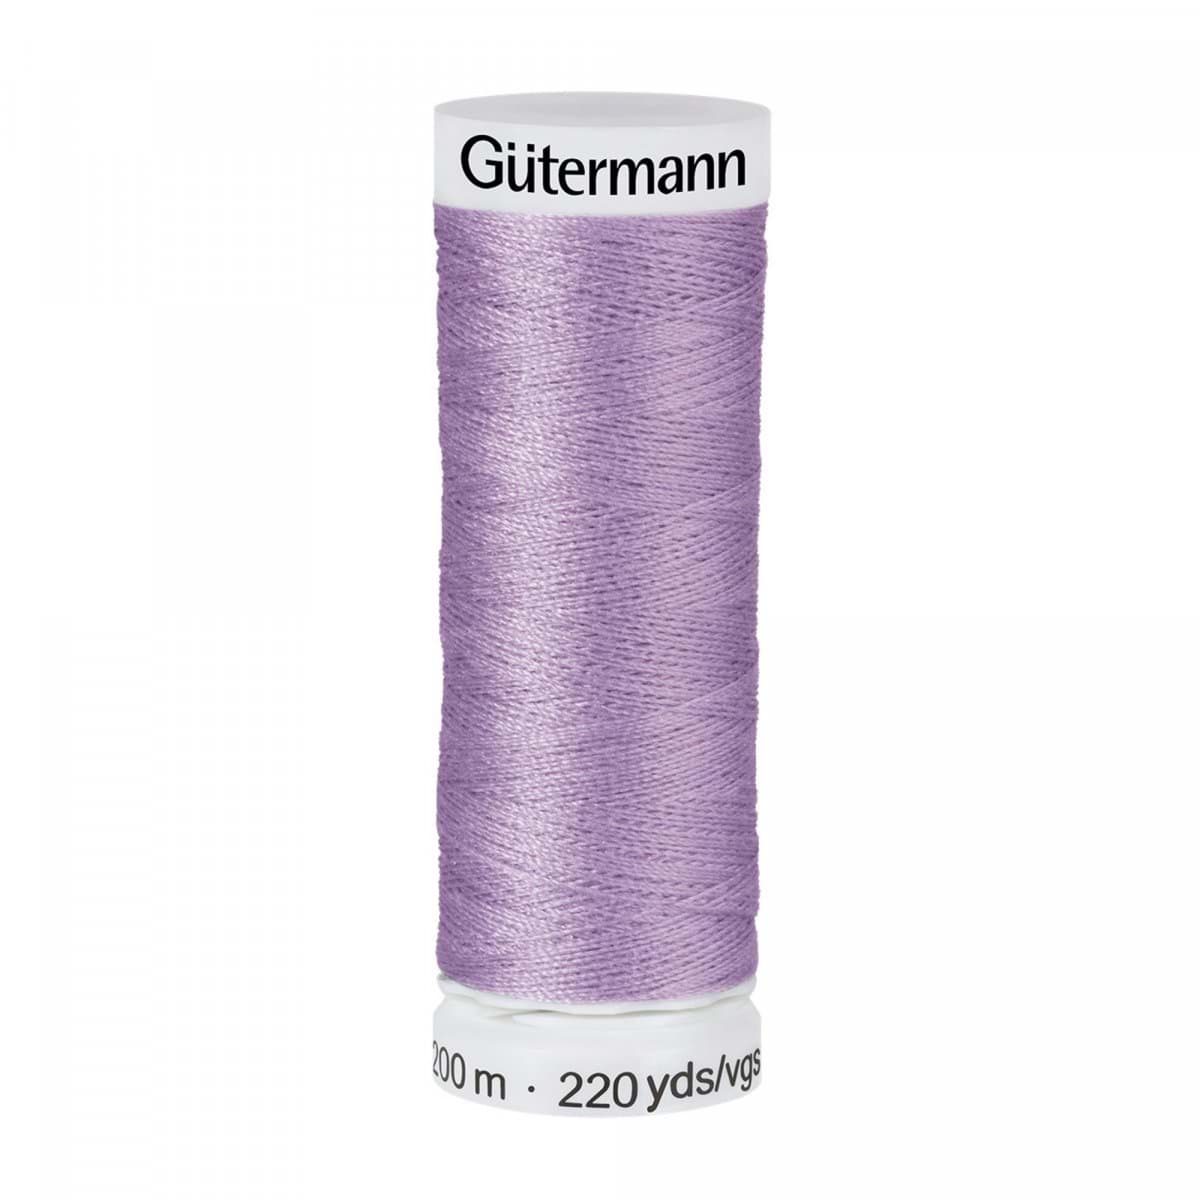 Picture of Gütermann Sew-all Thread - 200m - color: syringa 158